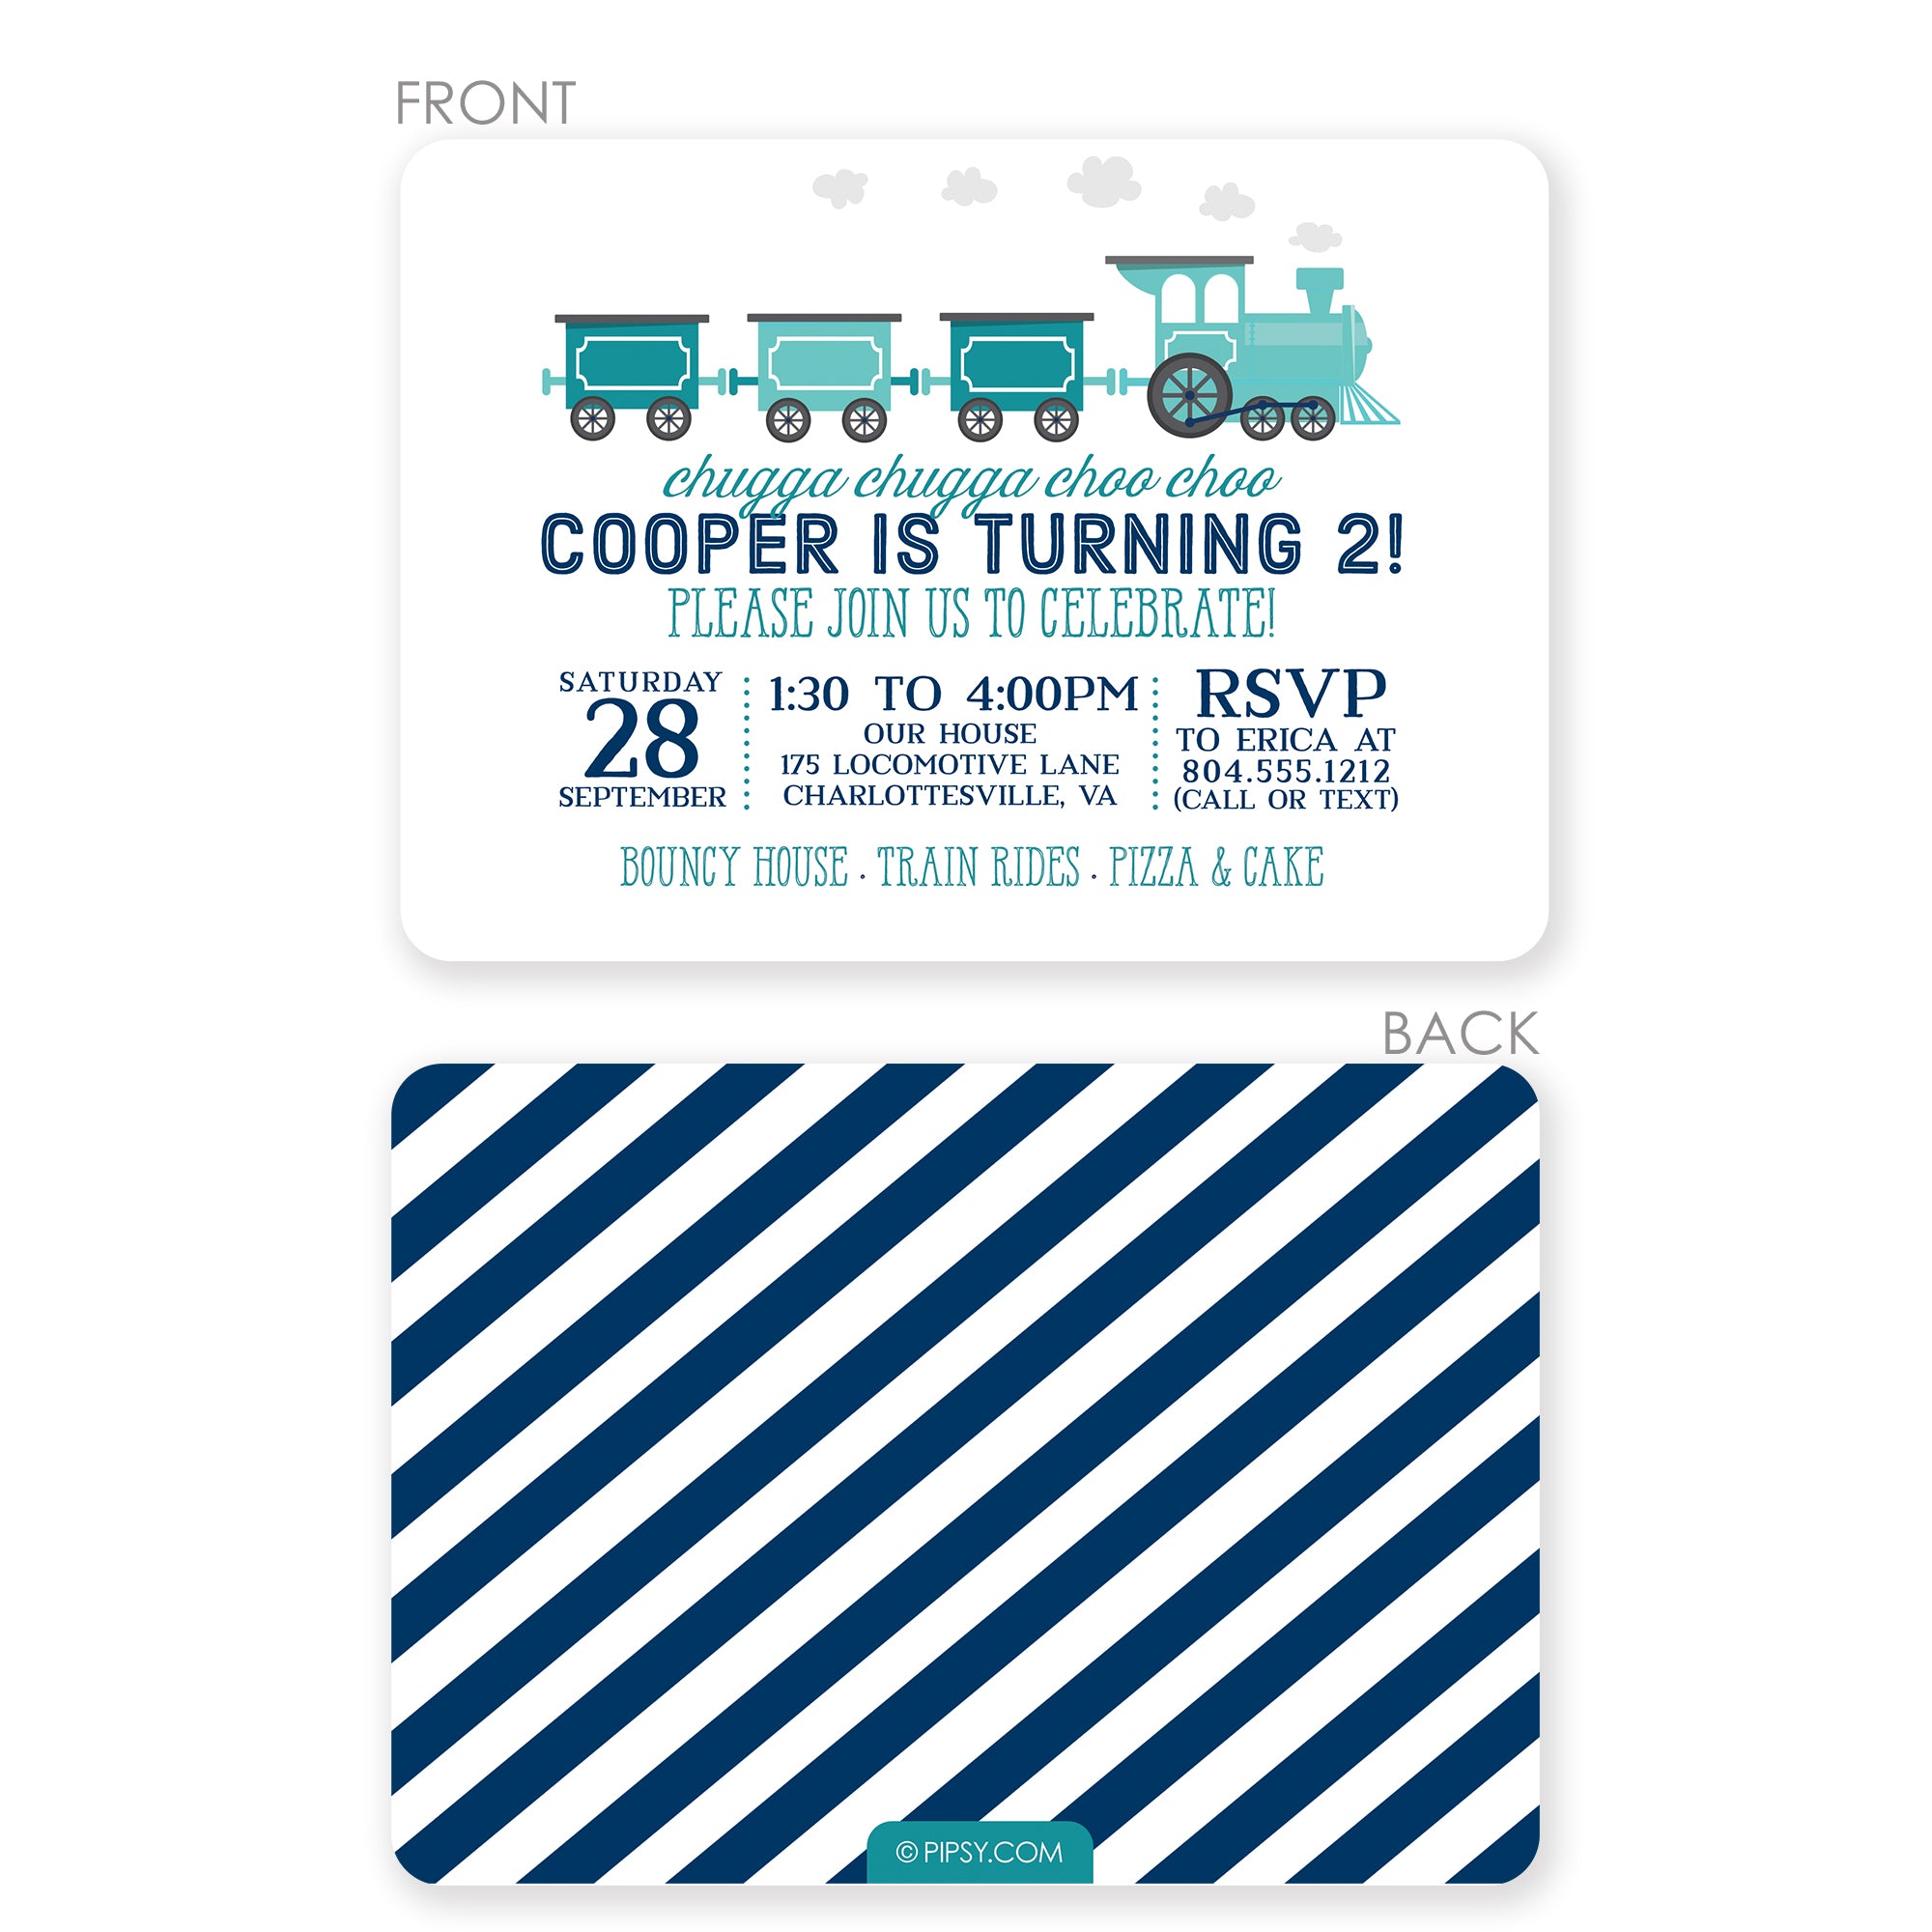 Cute train birthday invitations in navy blue, printed on thick cardstock with front and back side printing